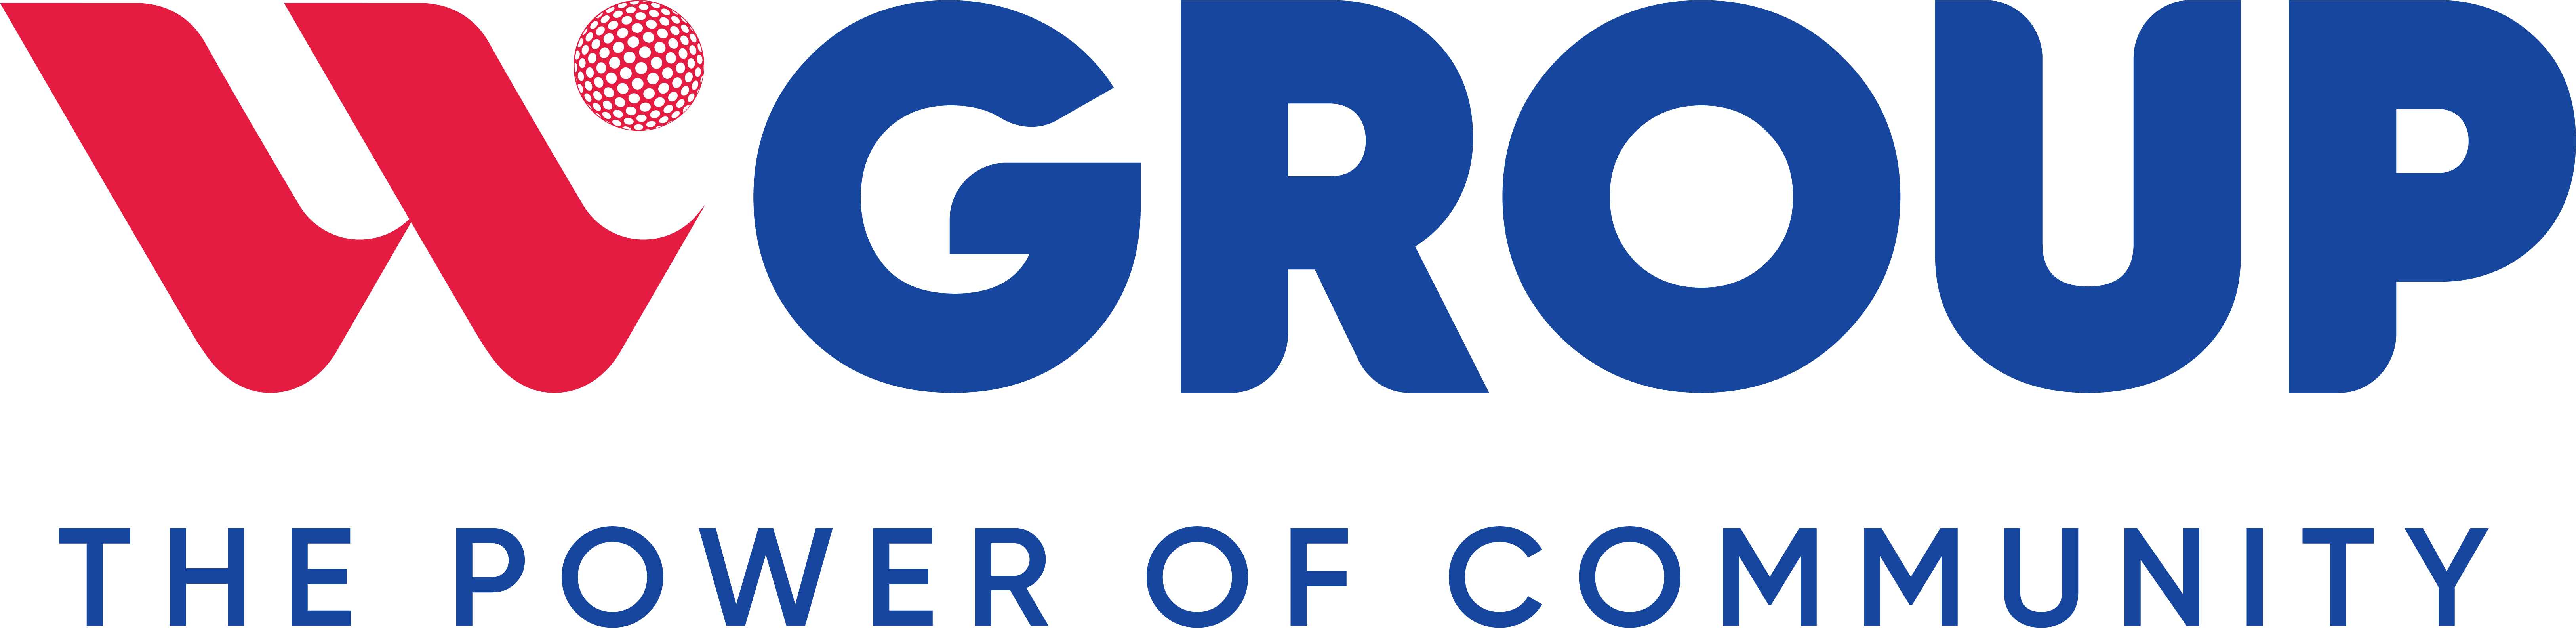 Wgroup - The Power Of Community